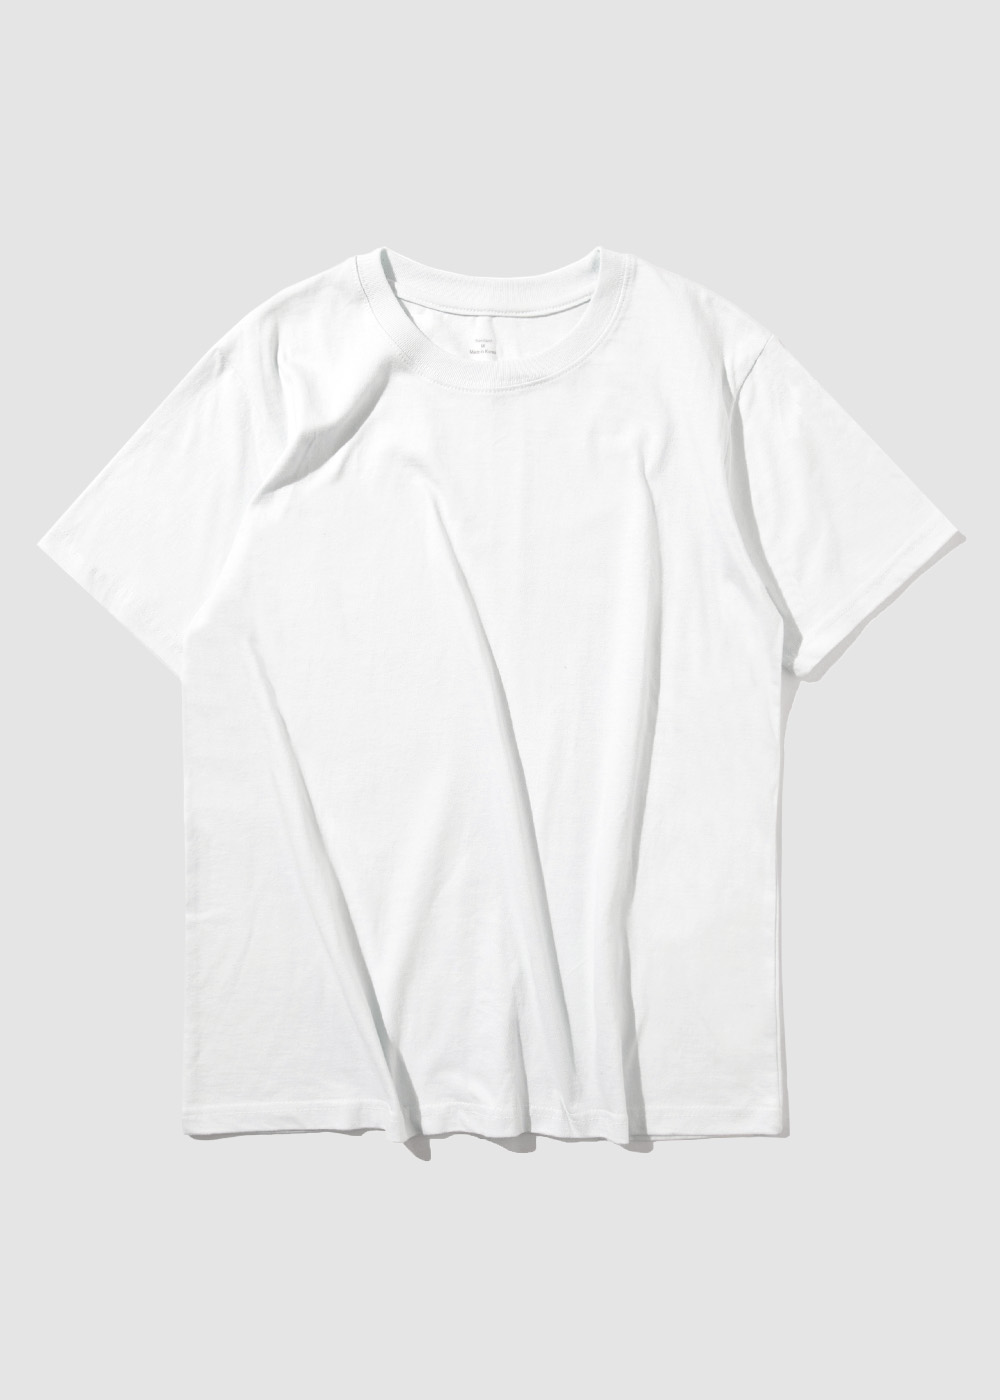 D. Tumbled Carded Cotton 100% 20/1 Single T-shirt _ off white